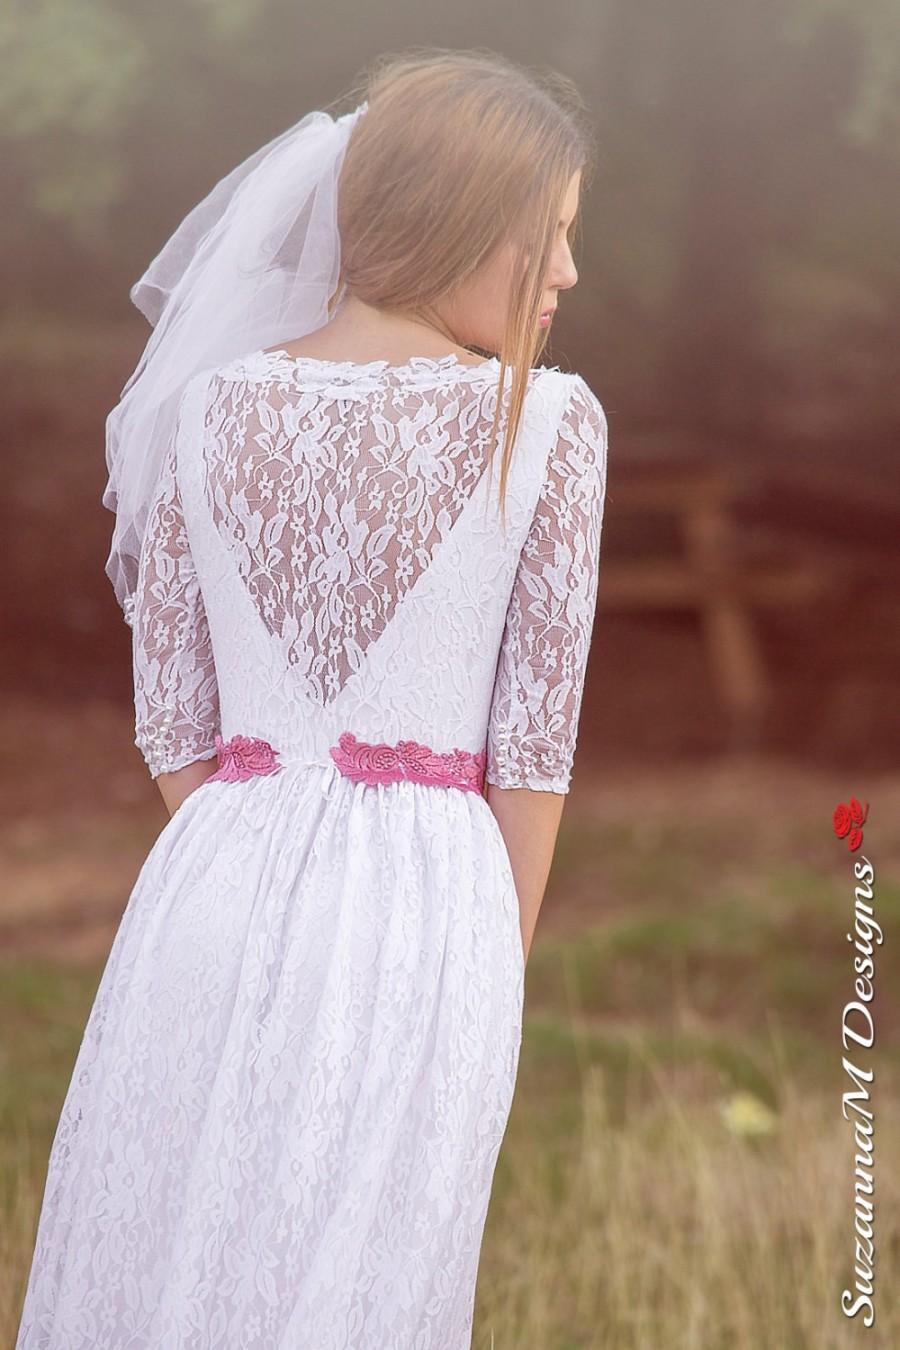 Mariage - White Lace Wedding Dress Romantic Lace Wedding Gown Long Wedding Gown Long Sleeve Wedding Dress - Handmade By SuzannaM Designs